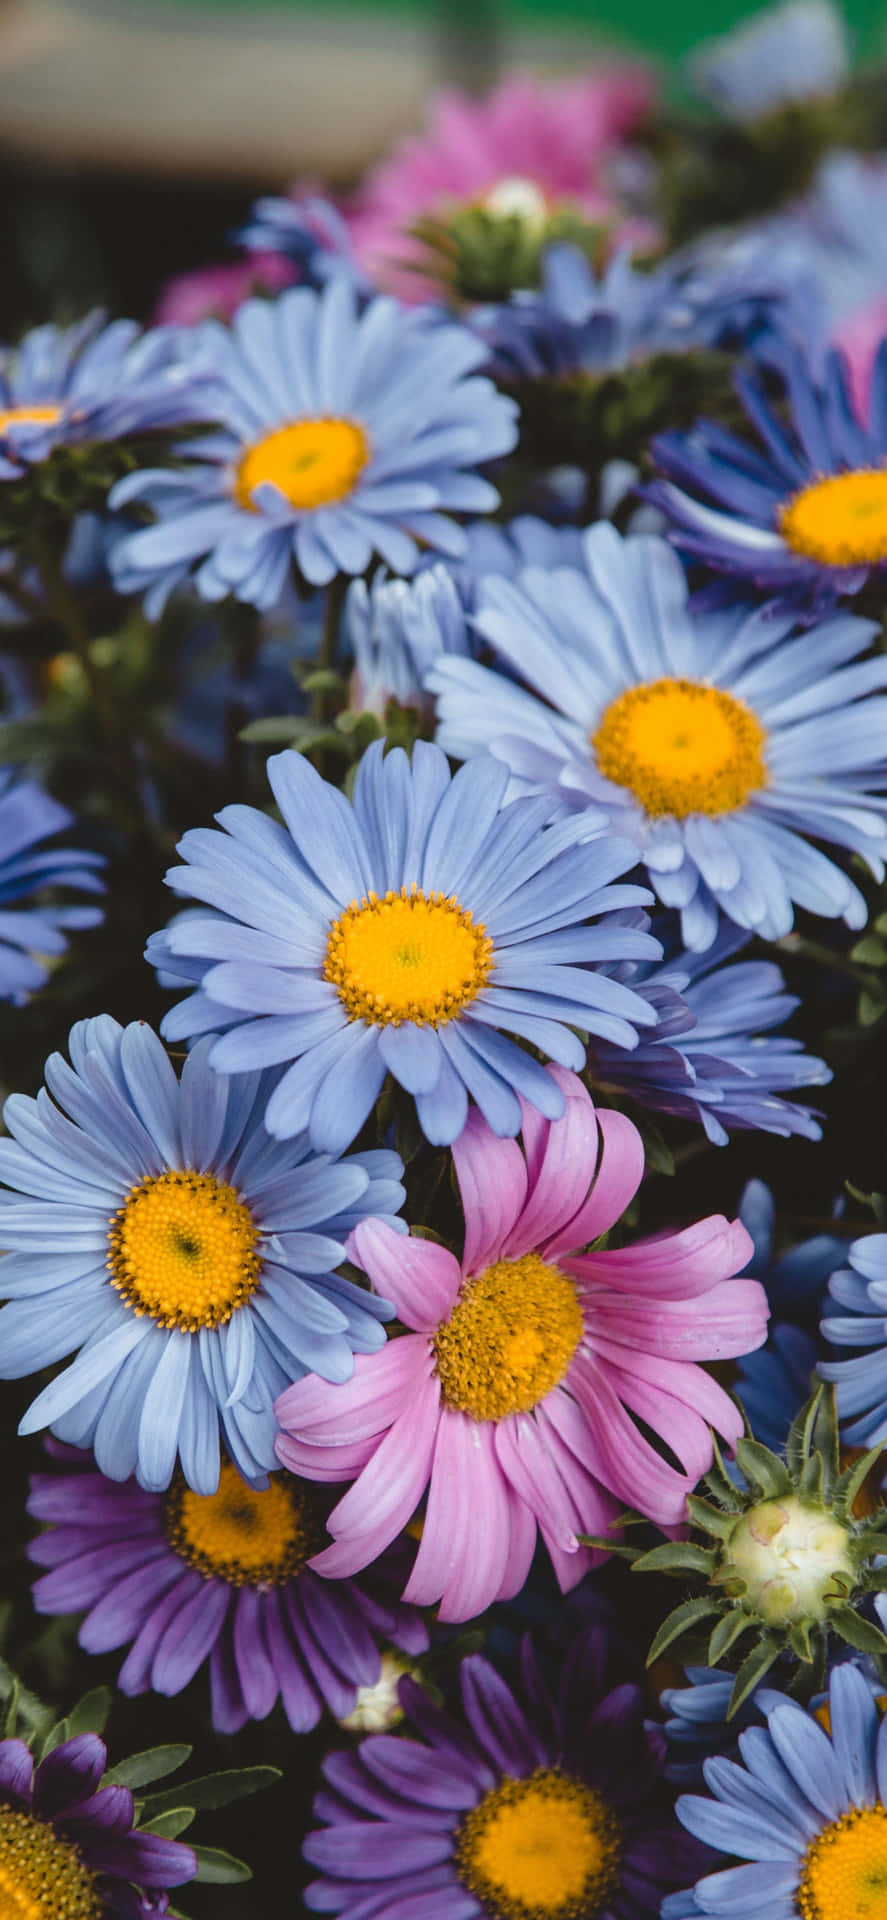 Caption: Enchanting Spring Daisies For Your iPhone Wallpaper